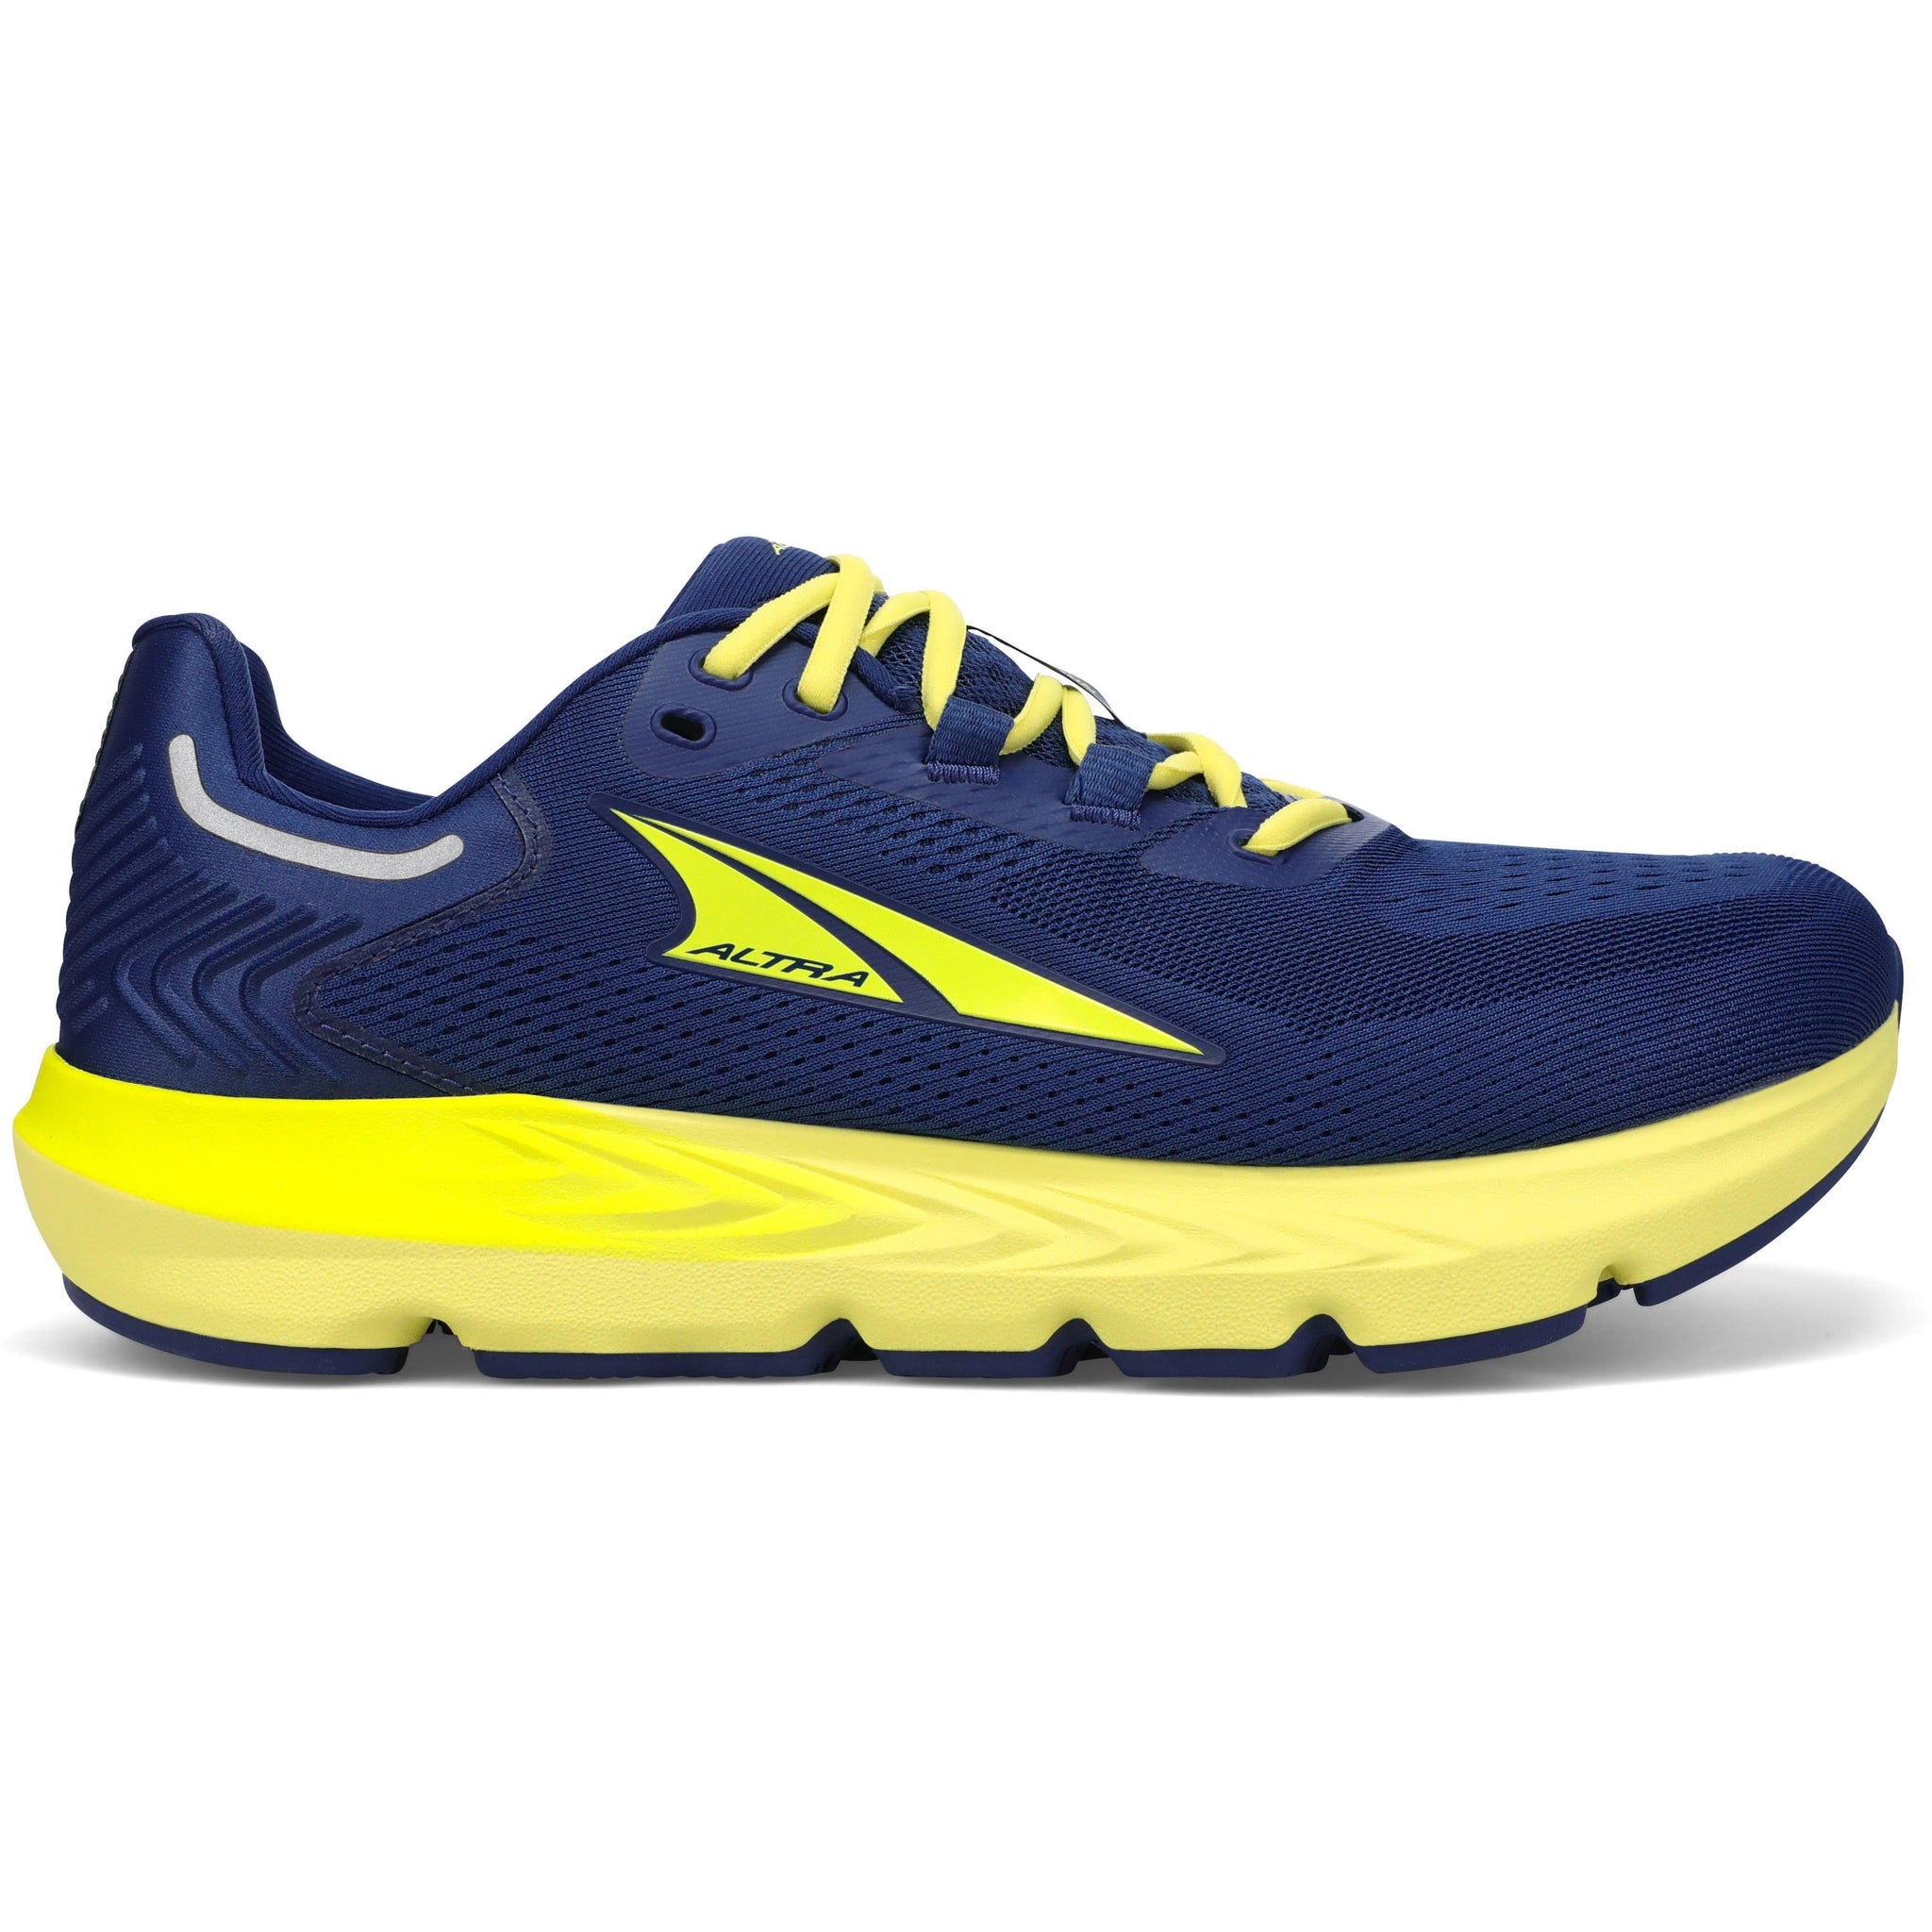 Altra Provision 7 Mens Running Shoes - Blue